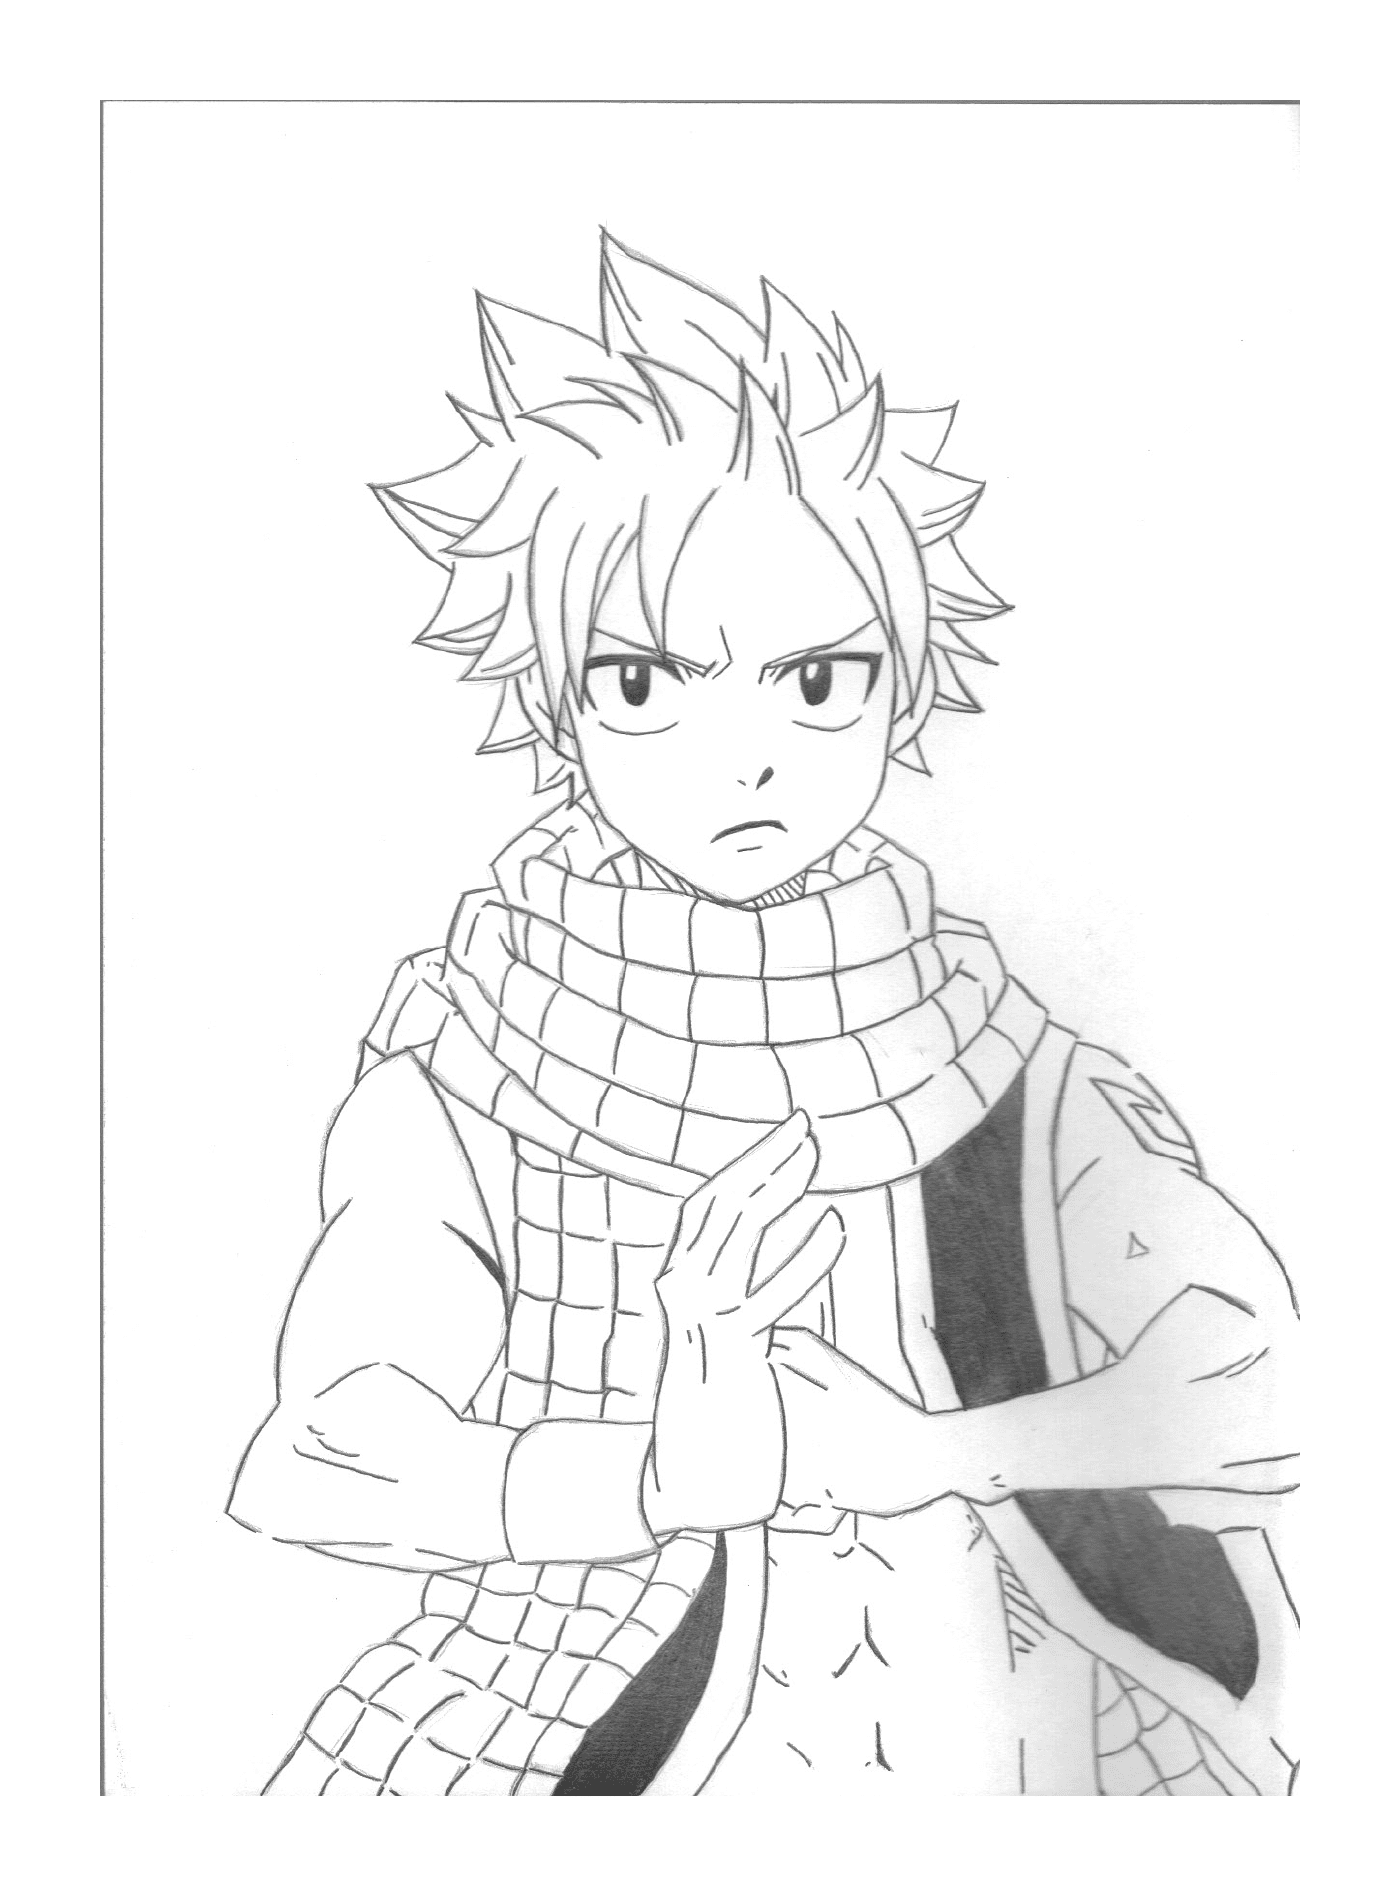  A man with a scarf 